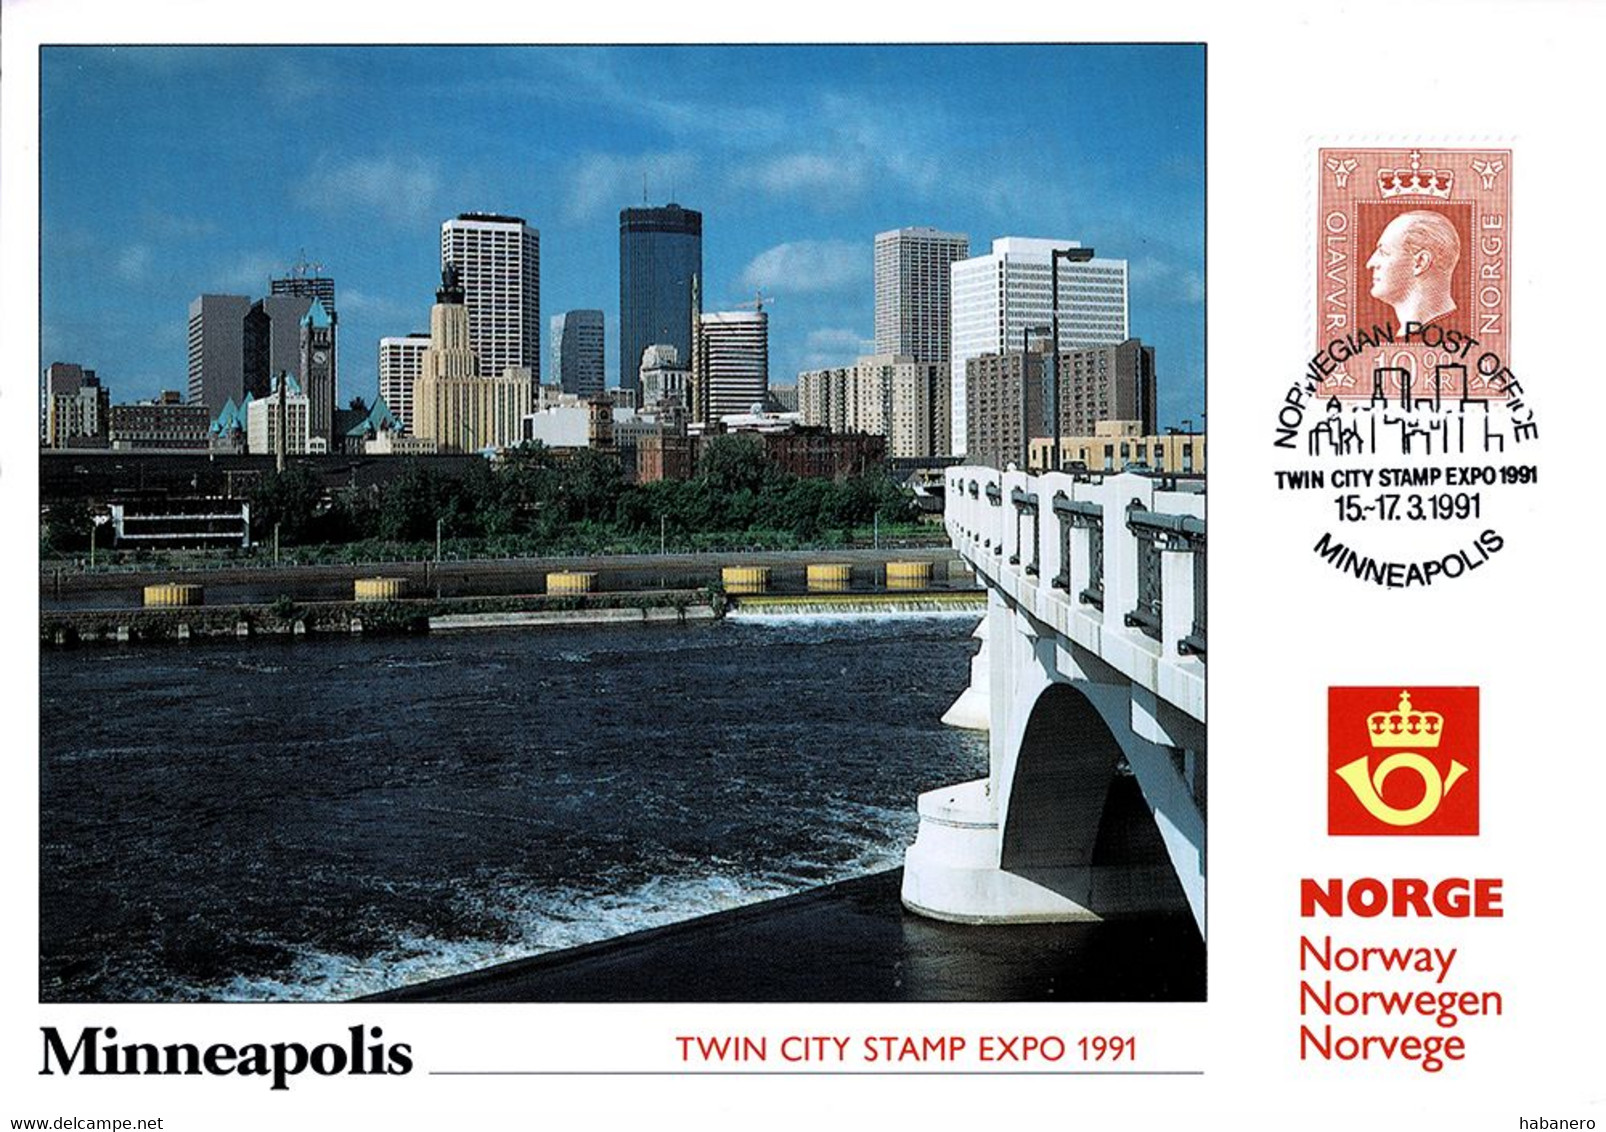 NORWAY 1991 PU78 TWIN CITY STAMP EXPO MINNEAPOLIS EXHIBITION CARD - Maximum Cards & Covers